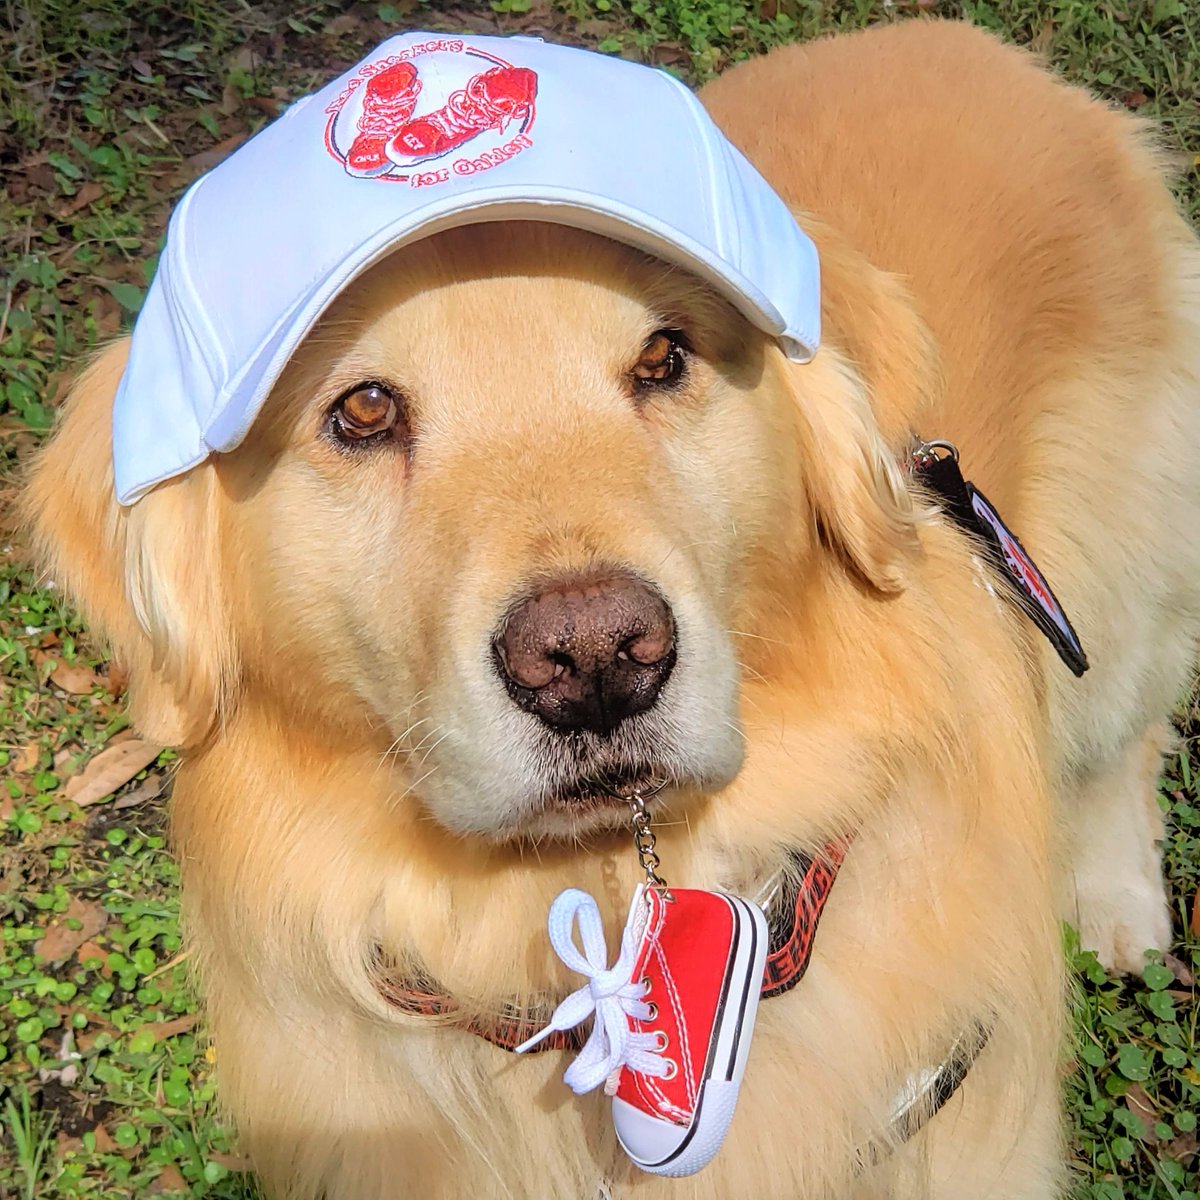 INTERNATIONAL RED SNEAKERS DAY for #FoodAllergyAwareness
Learn all about Oakley’s story redsneakers.org

@oakley_red #redsneakersforoakley #internationalredsneakersday #dogsoftwitter #dogs